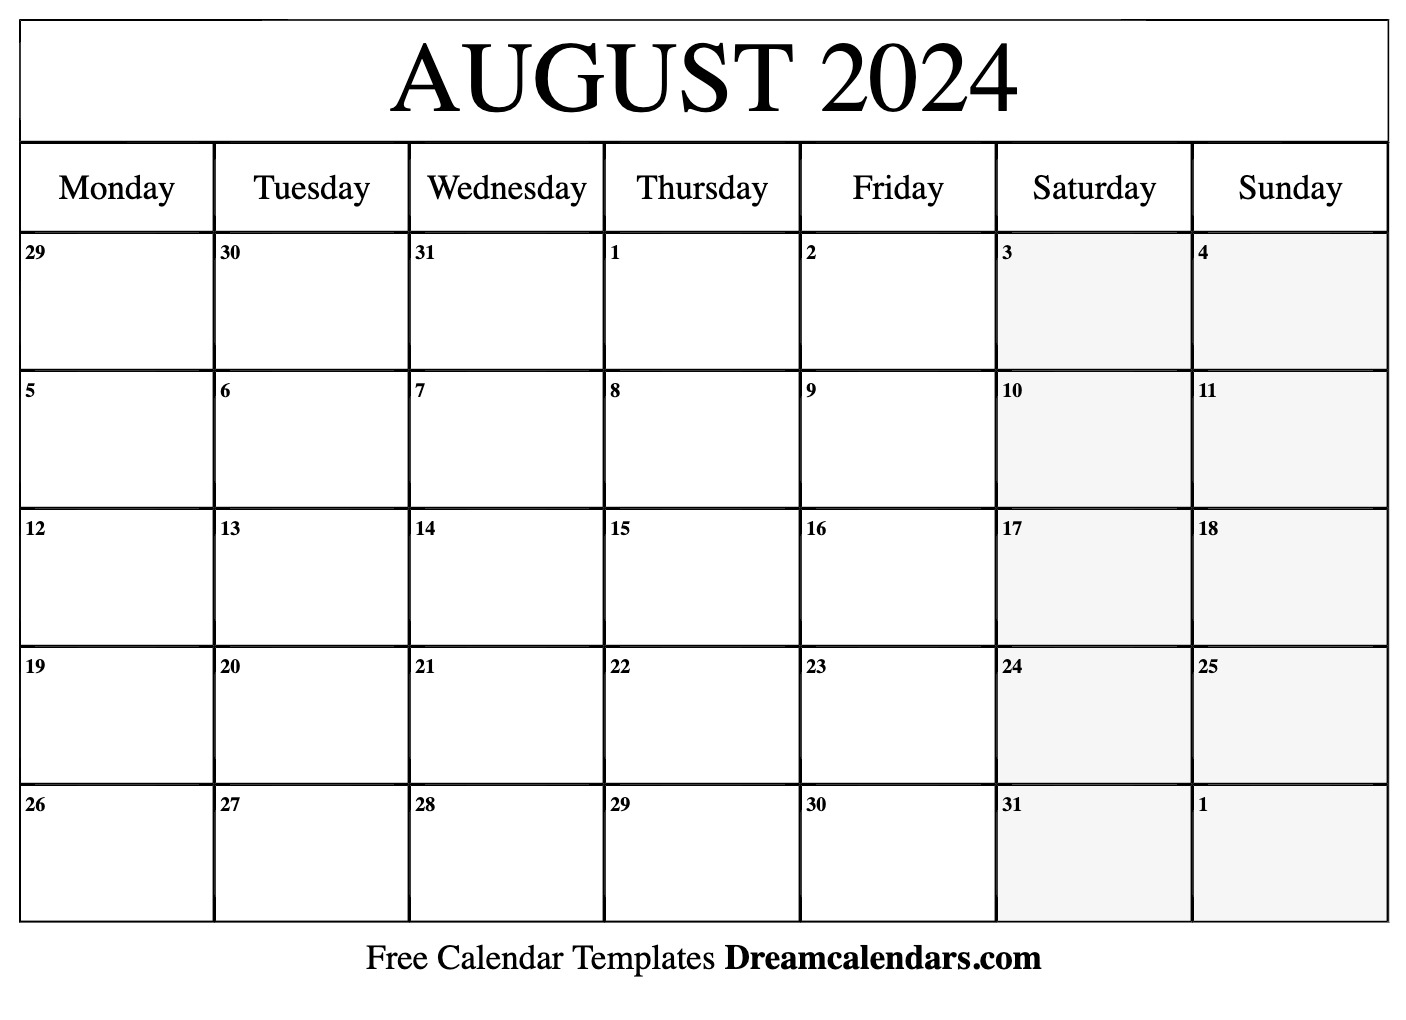 August 2024 Calendar | Free Blank Printable With Holidays for Printable June July August 2024 Calendar